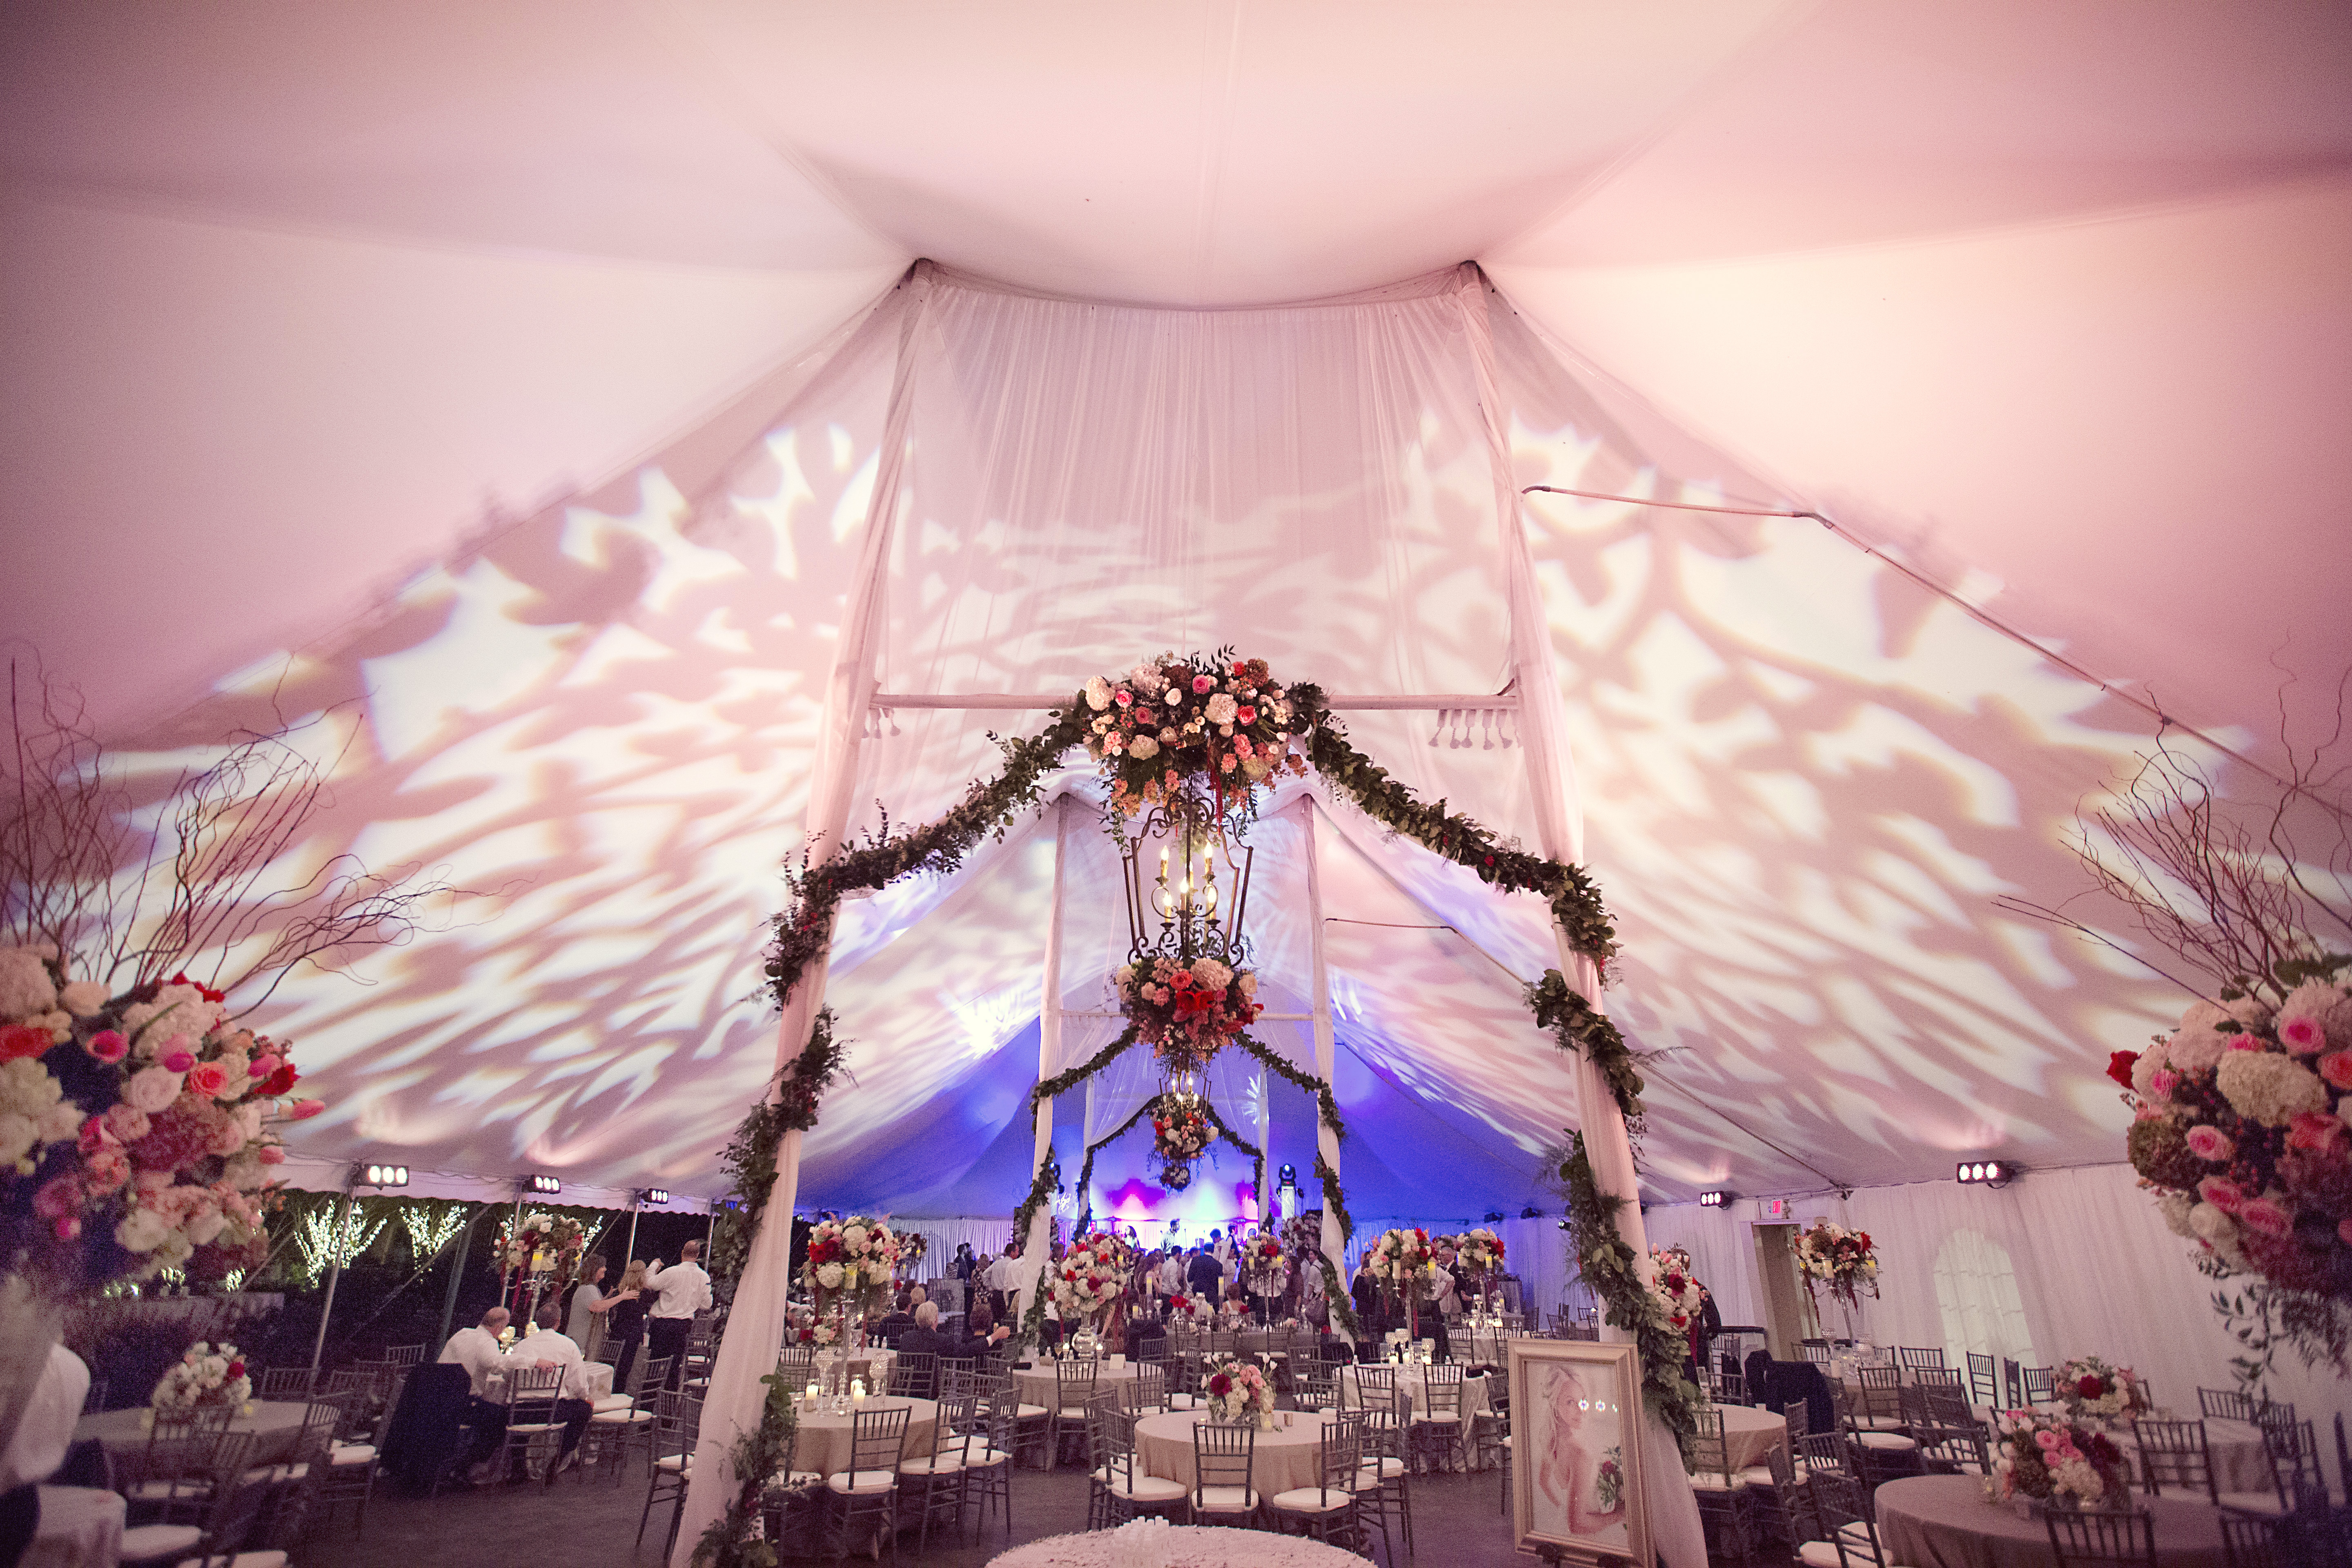 Go Beyond with pattern projections gobos lights pattern dallas fort worth events weddings phot by Sarah Kate_0013